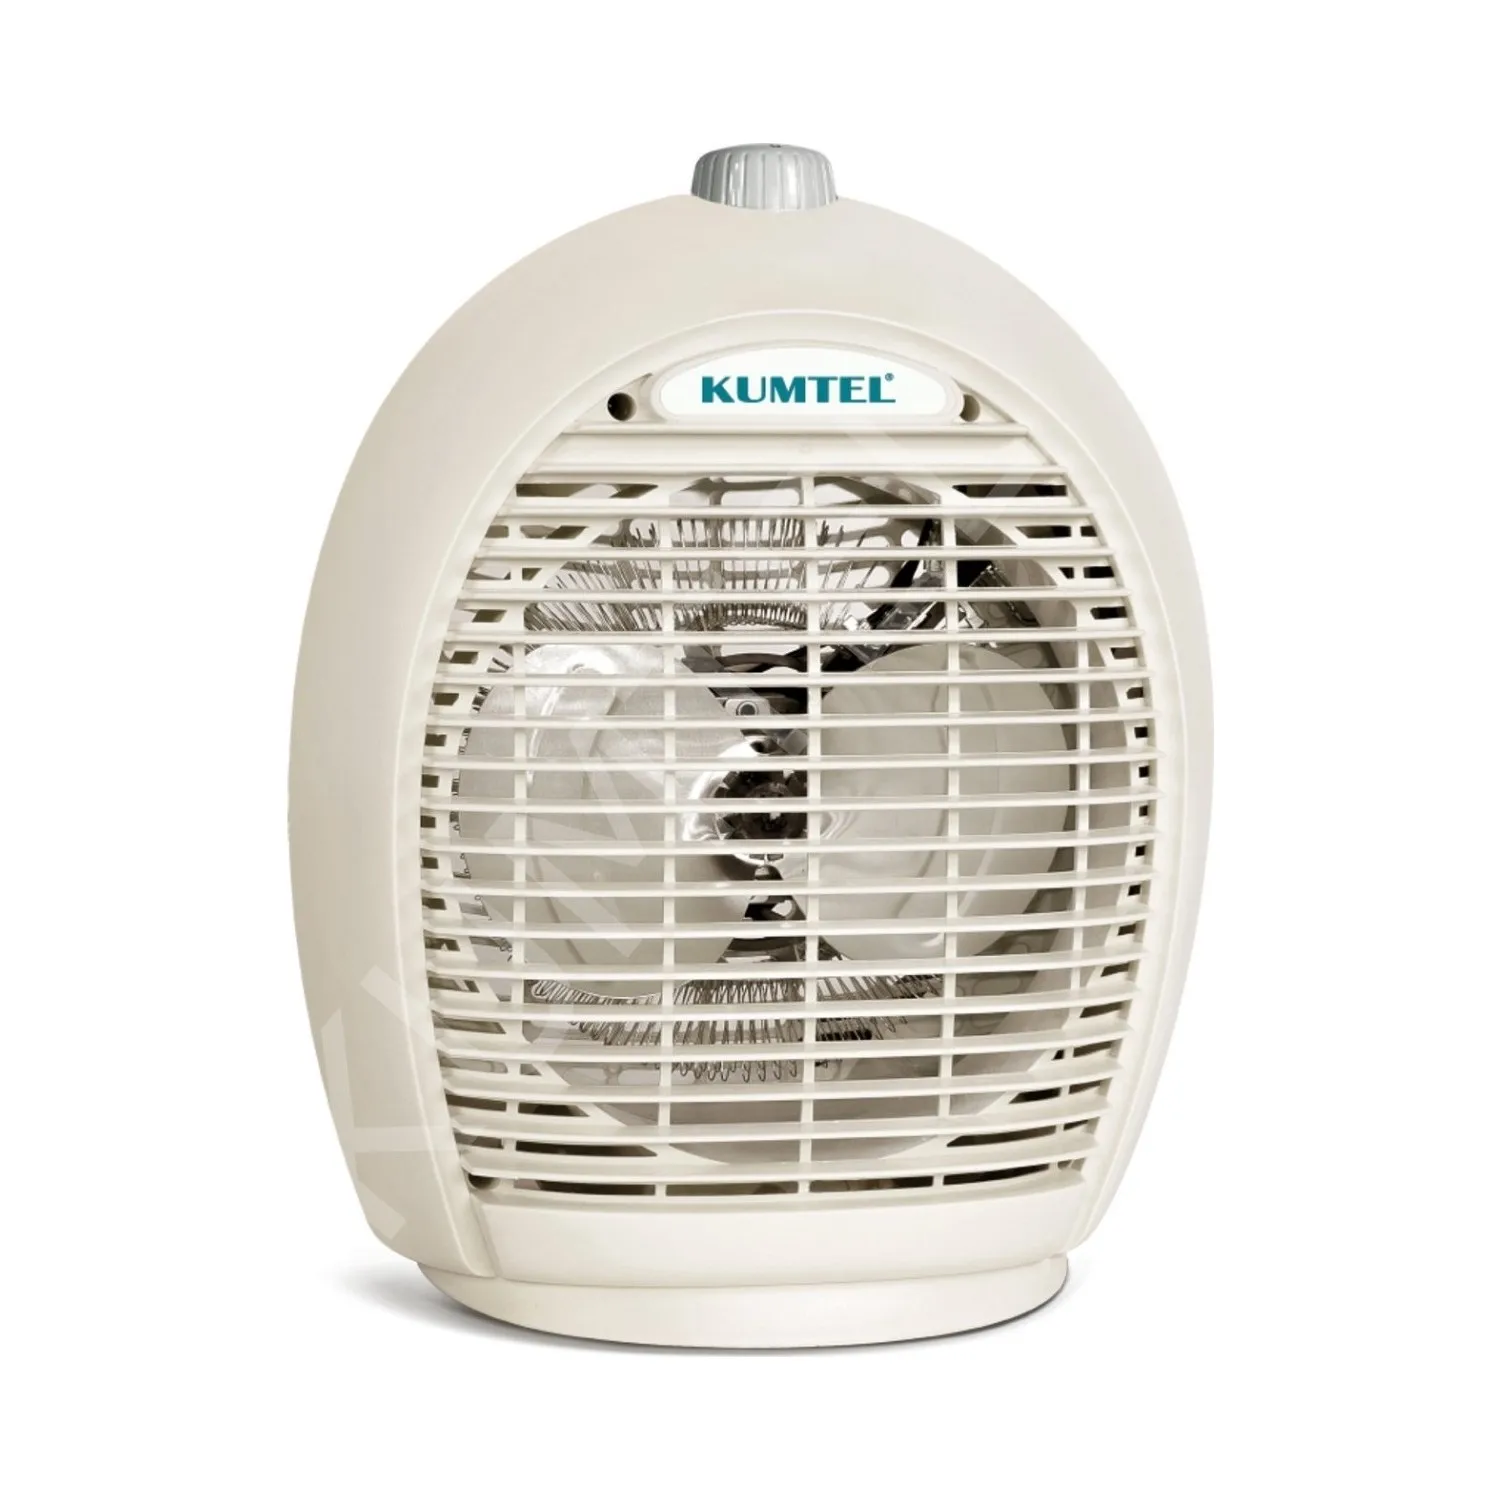 Kumtel LX-6331 2000W Fan Heater Cream Office Home Waiting room can be used even under the table Portable